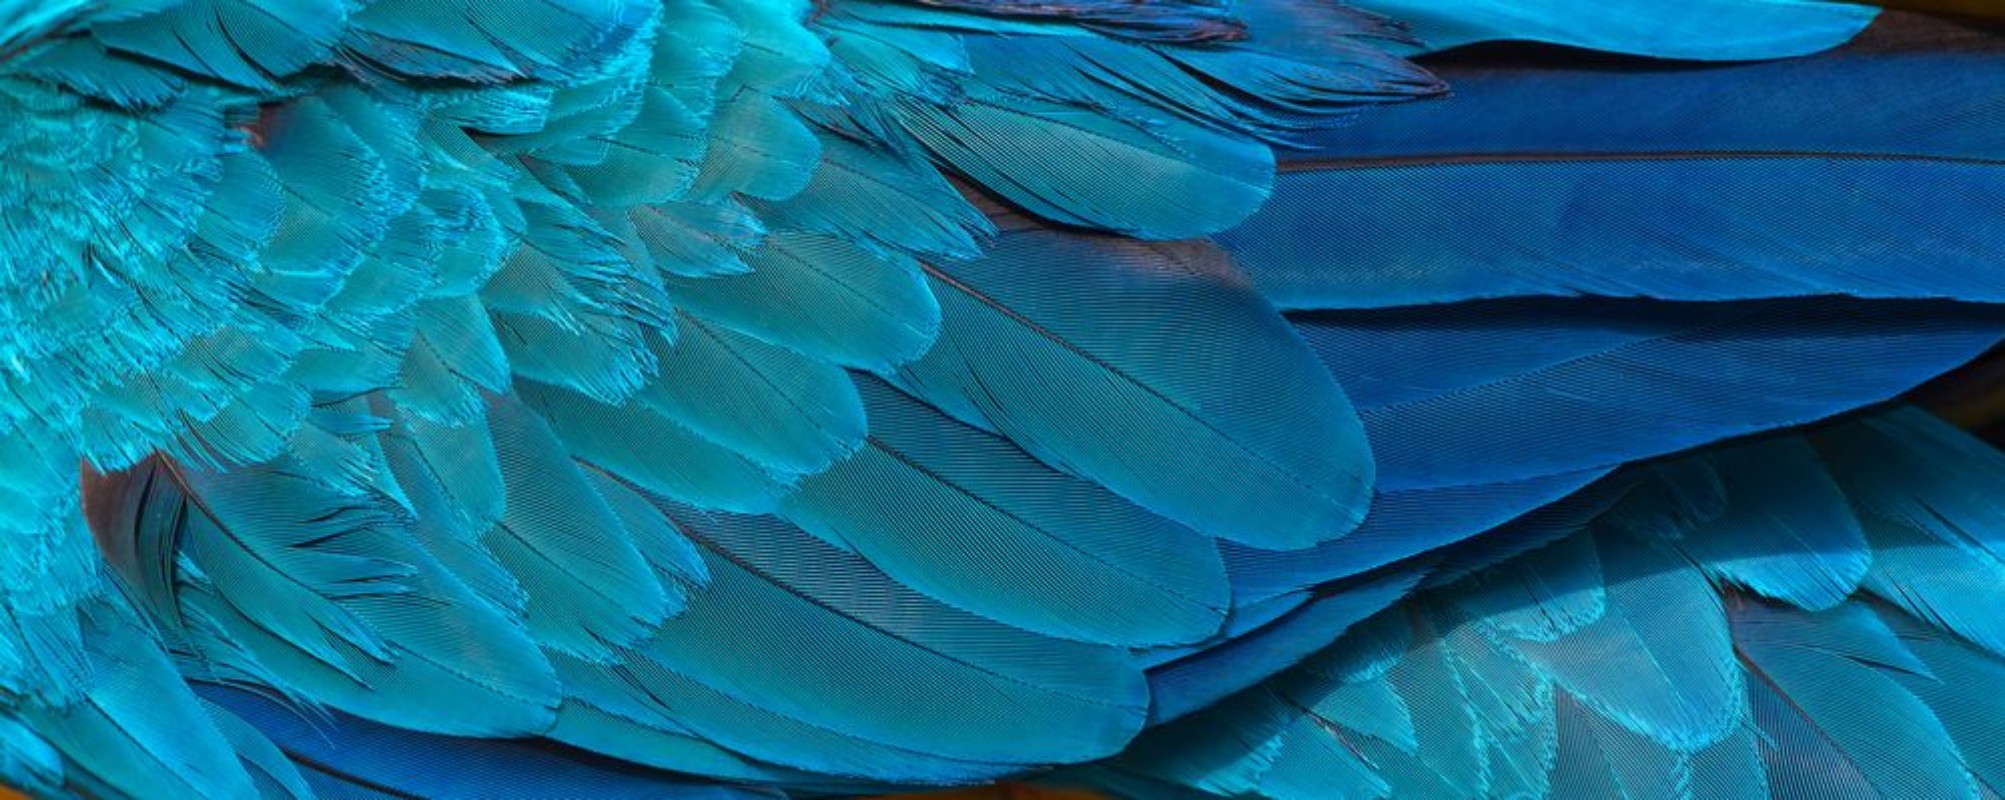 Image de Colorful of blue and gold birds feathers exotic nature background and texture macaw feathers wing macaw